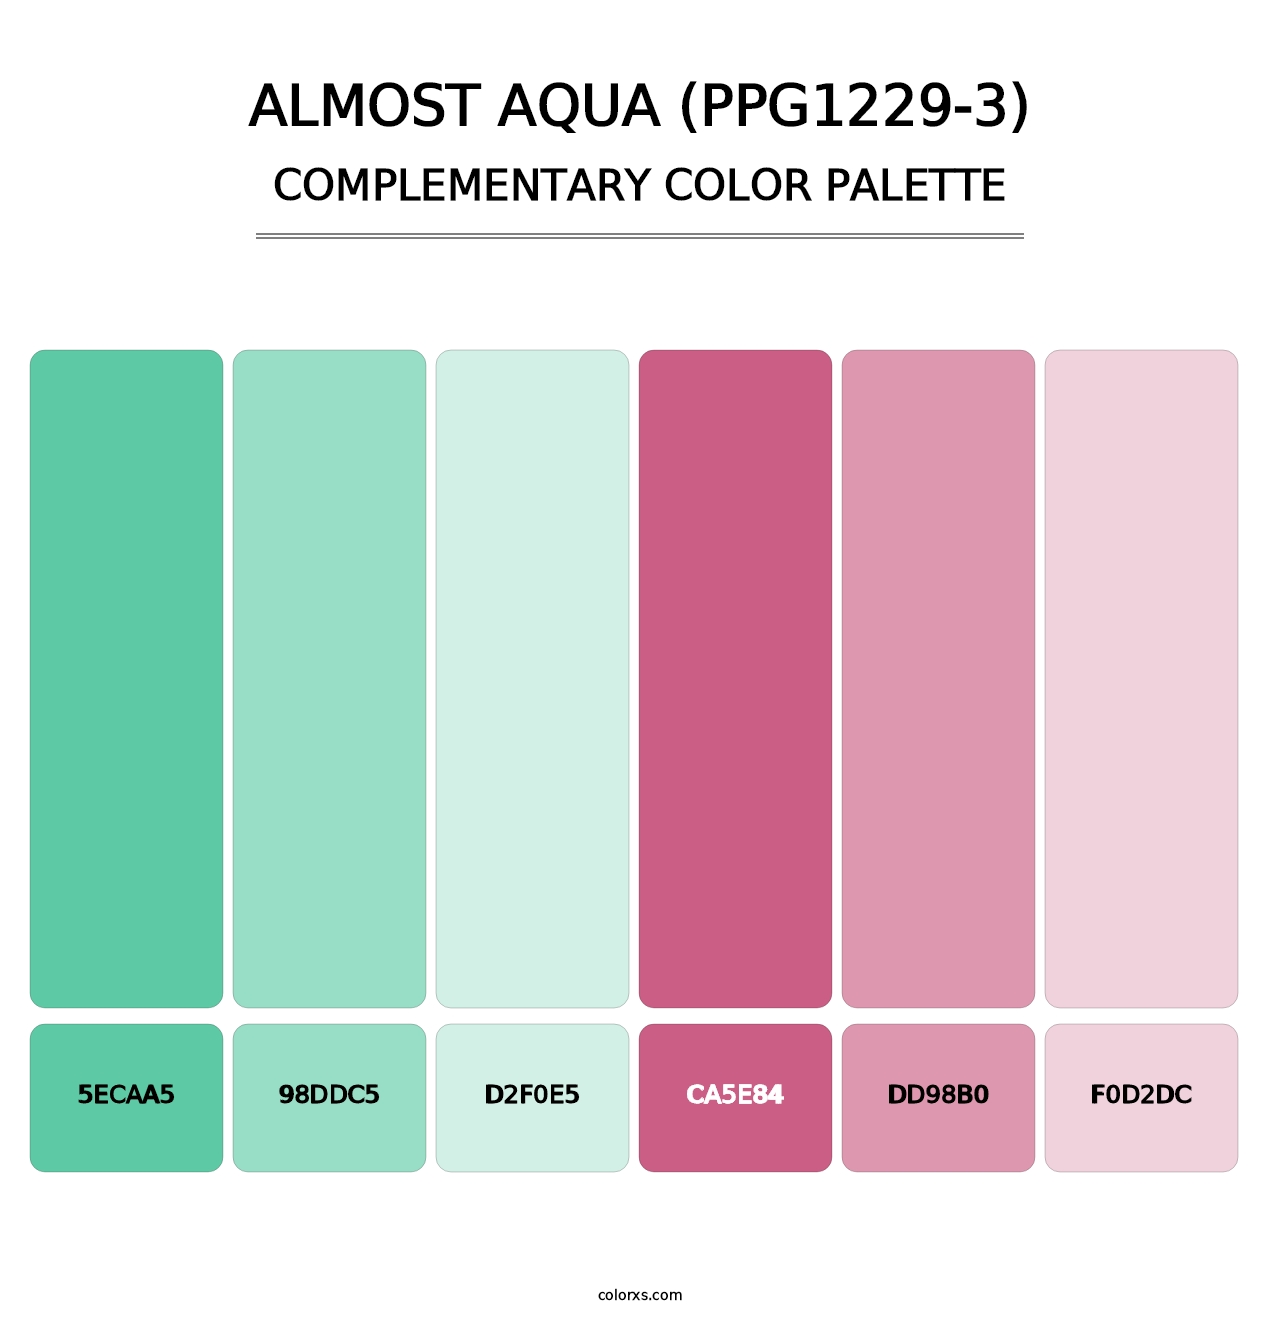 Almost Aqua (PPG1229-3) - Complementary Color Palette